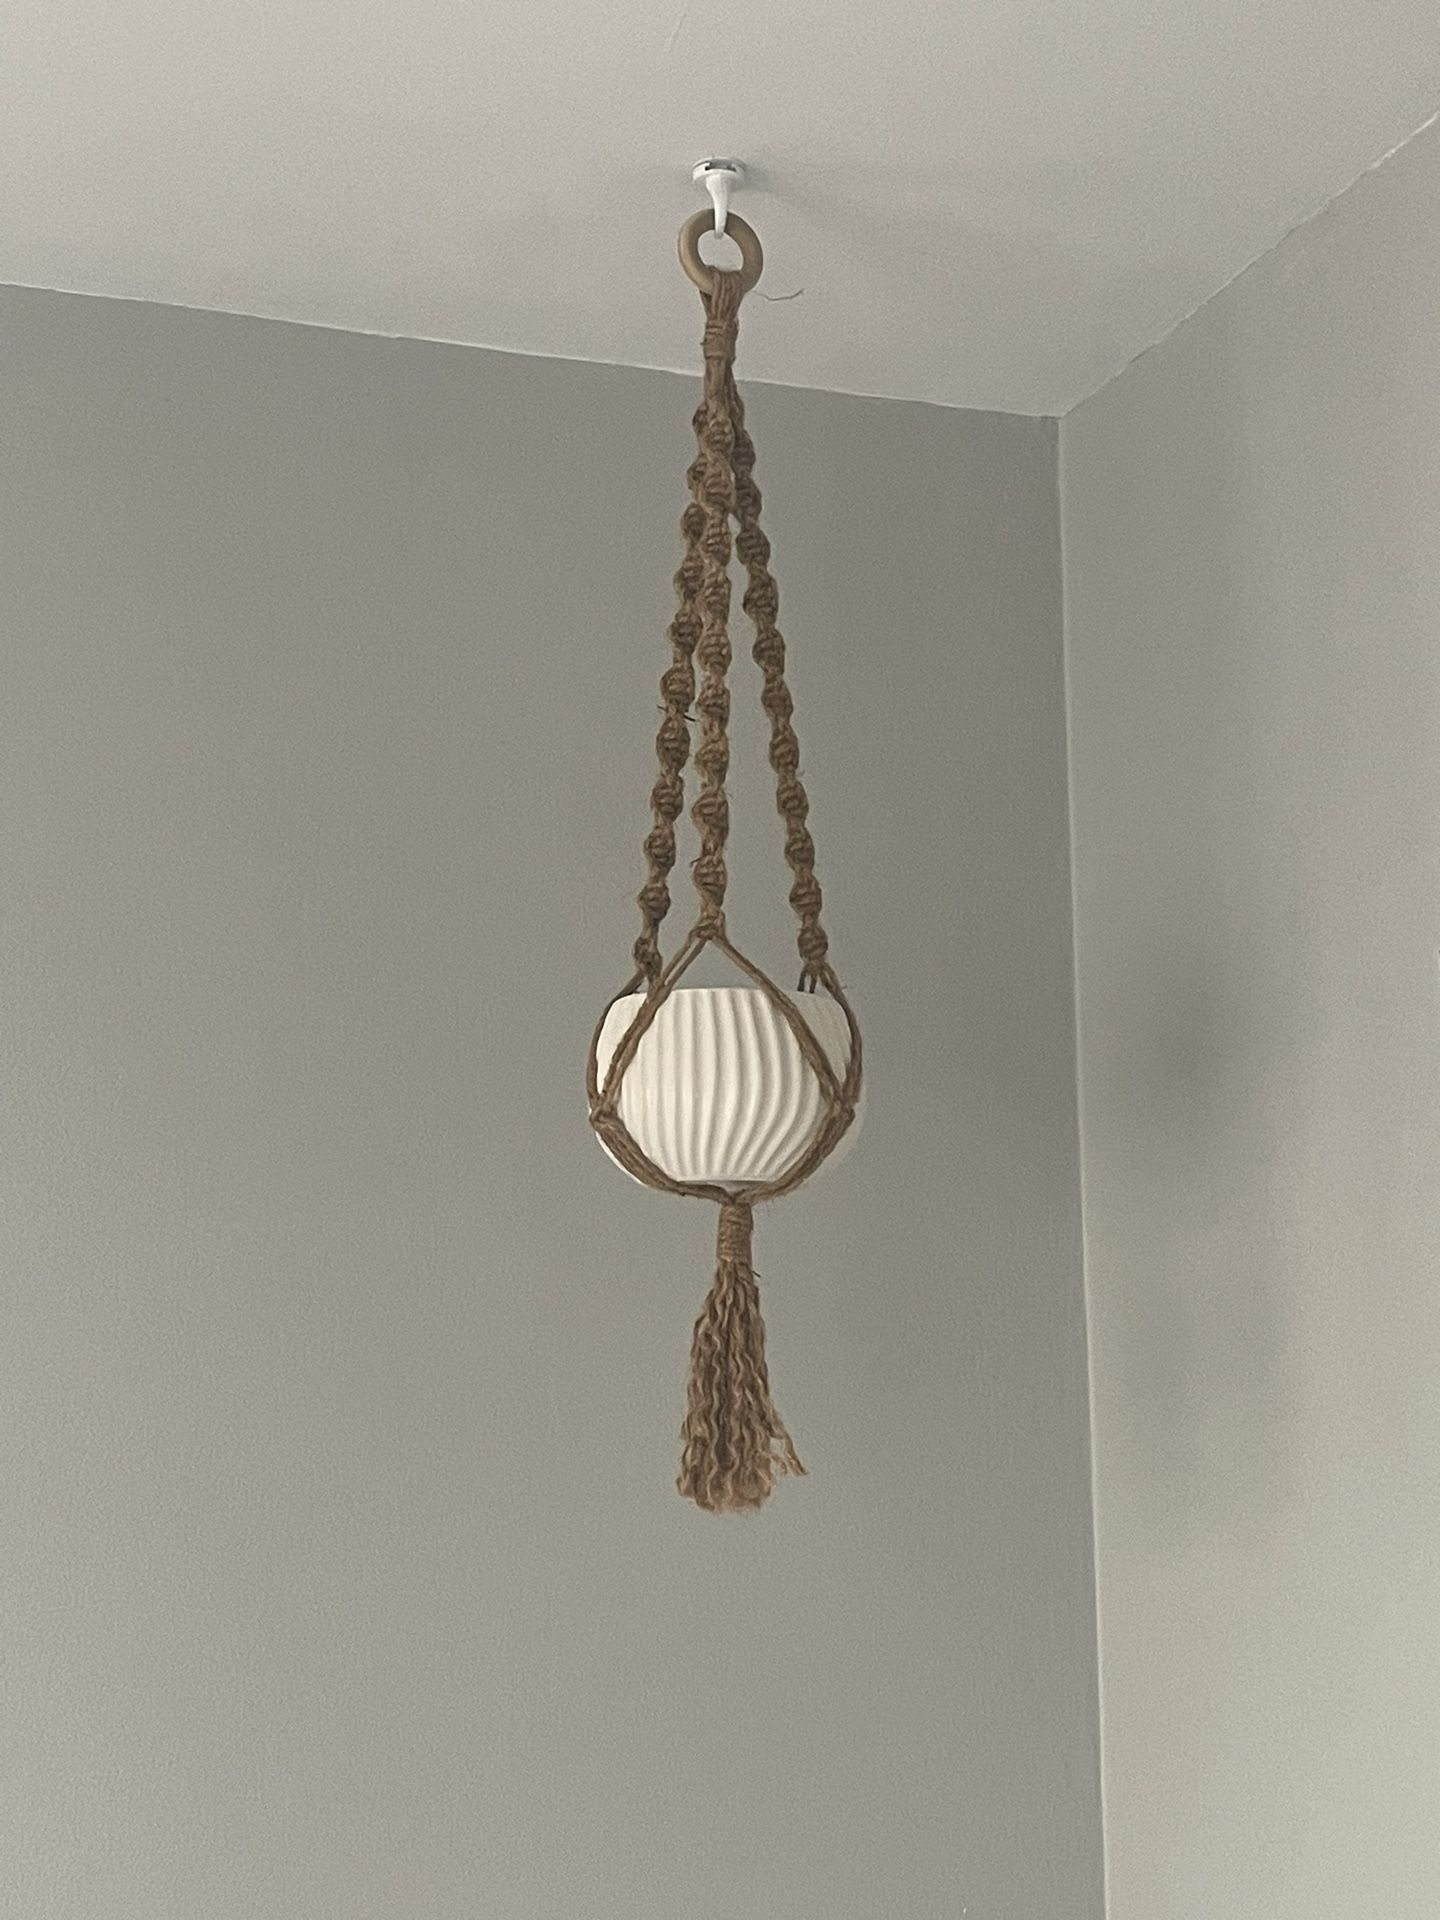 Macrame Plant Hanger With Ceramic Pot With Drainage Hole